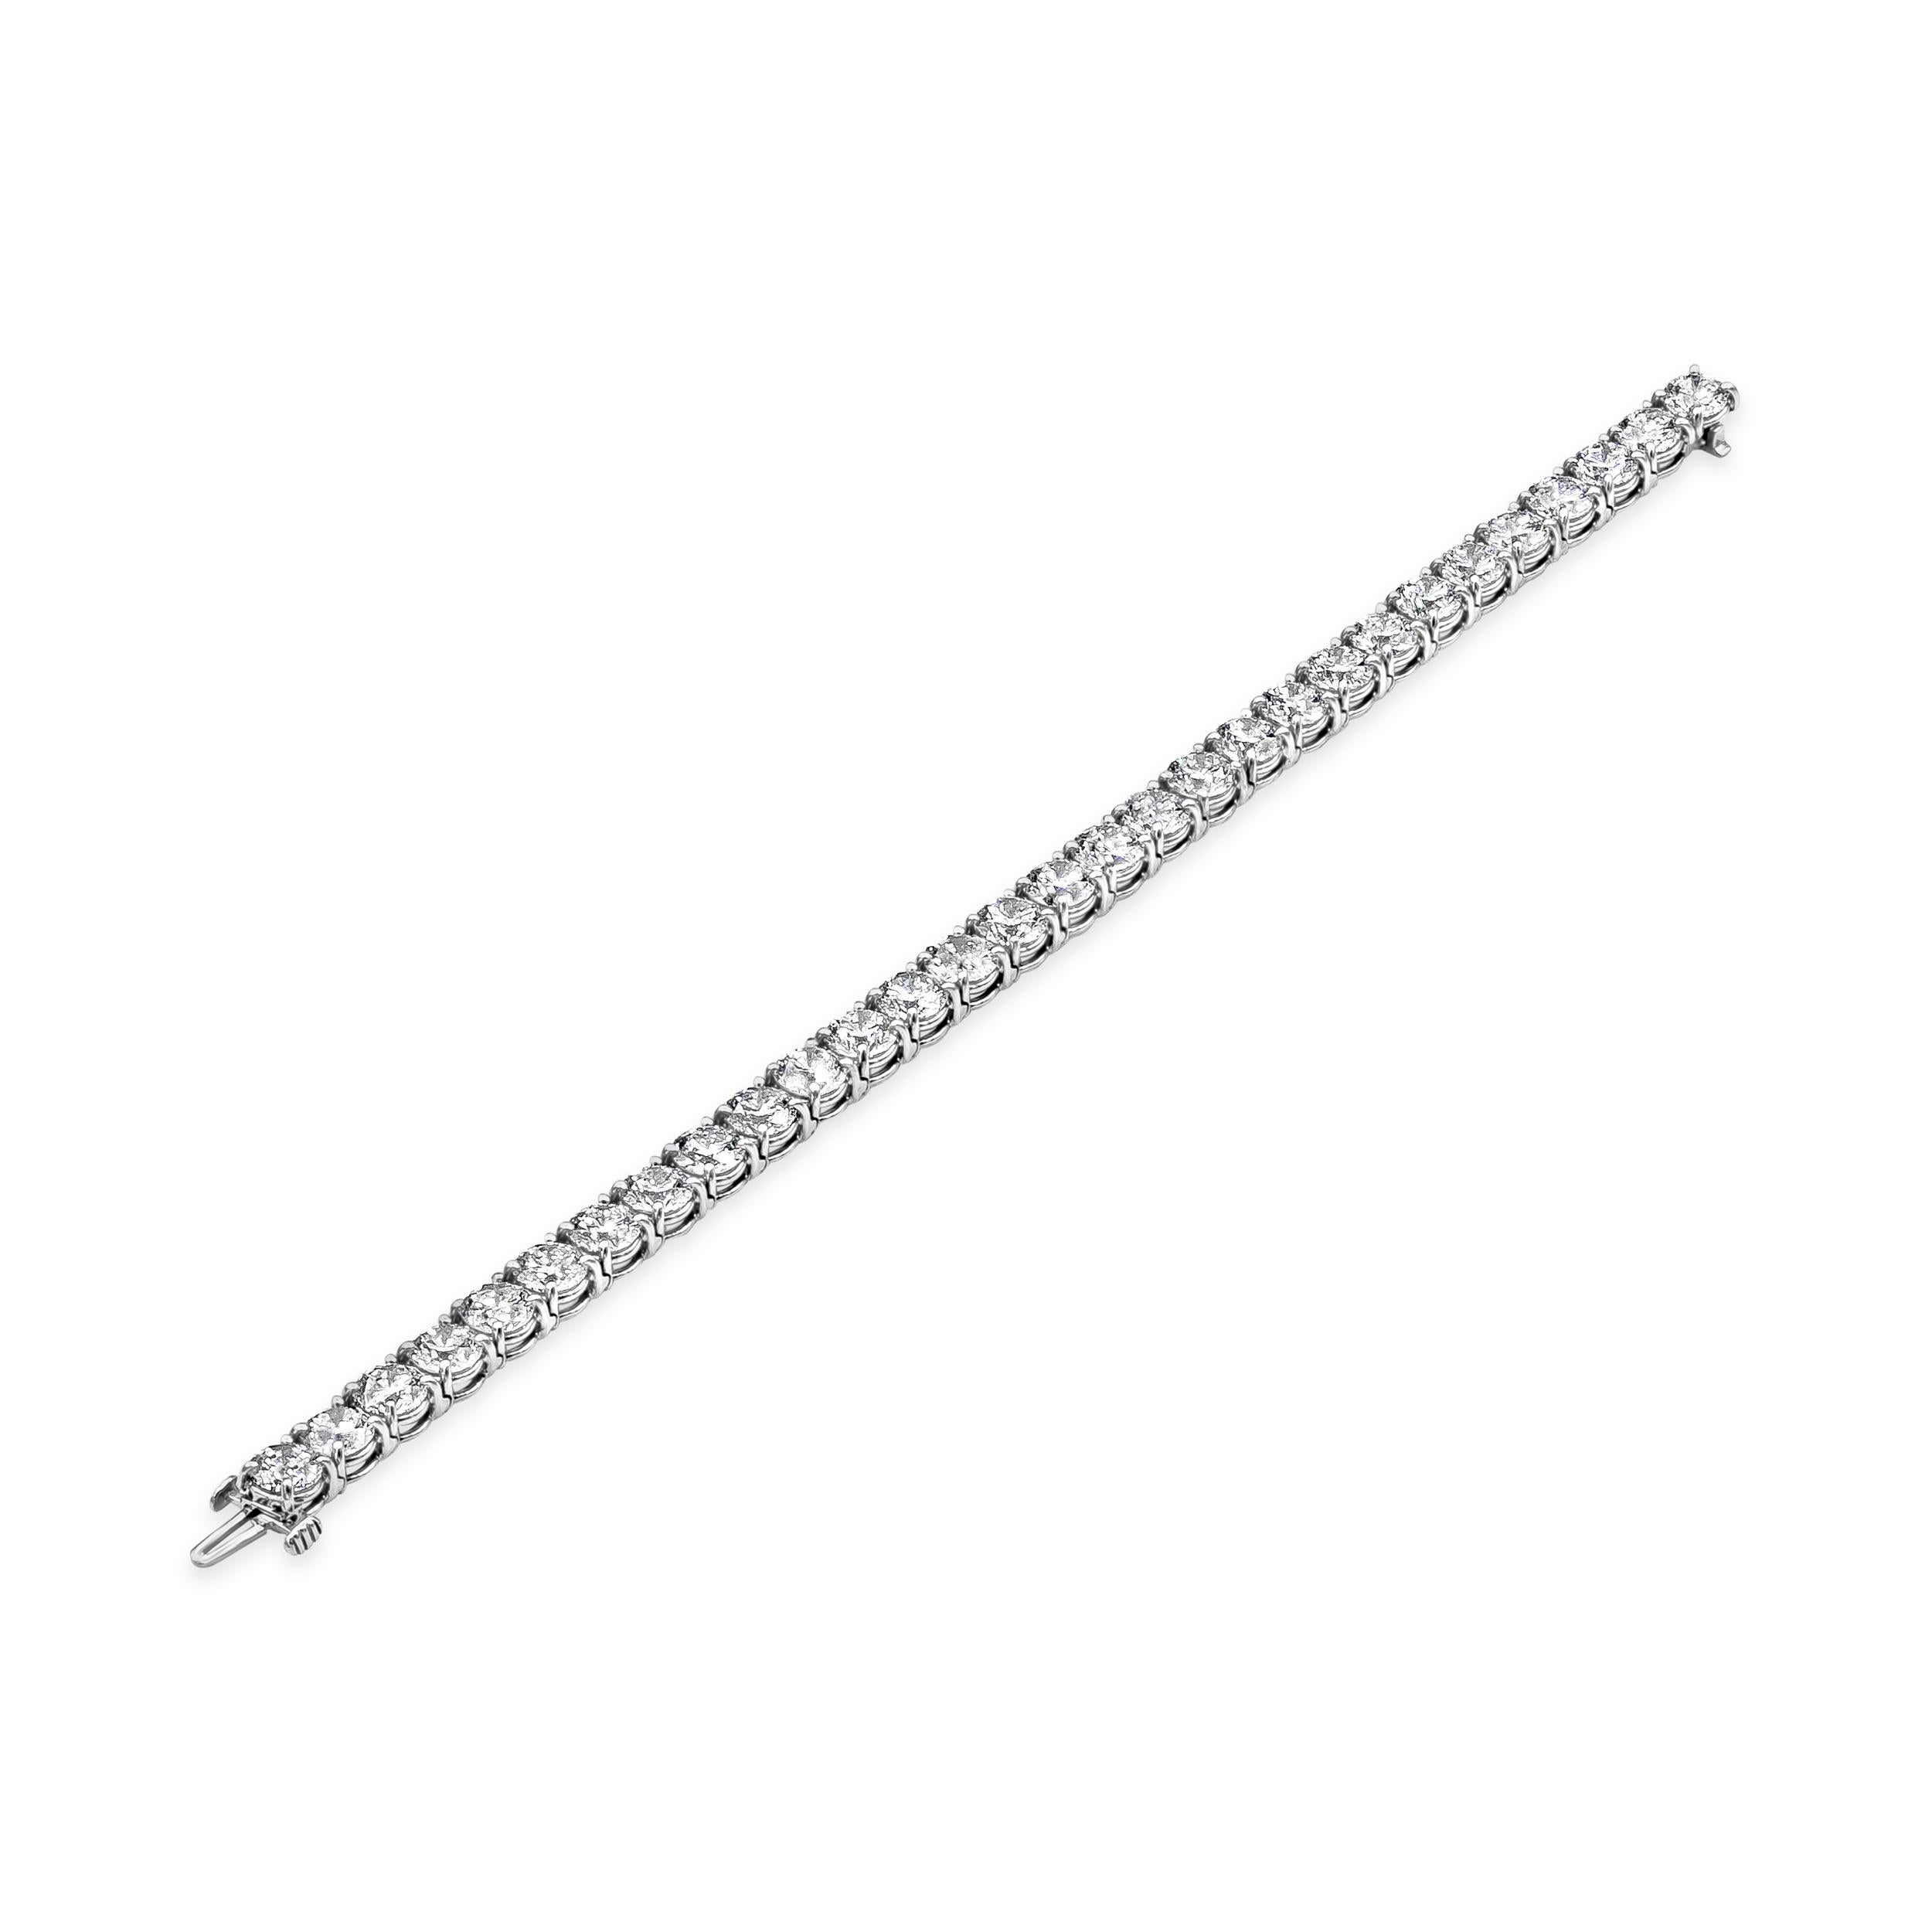 A classic tennis bracelet style showcasing  a row of round brilliant diamonds in a four-prong open gallery setting. Diamonds weigh 22.58 carats total. Made with platinum and 7 inches in Length.

Roman Malakov is a custom house, specializing in